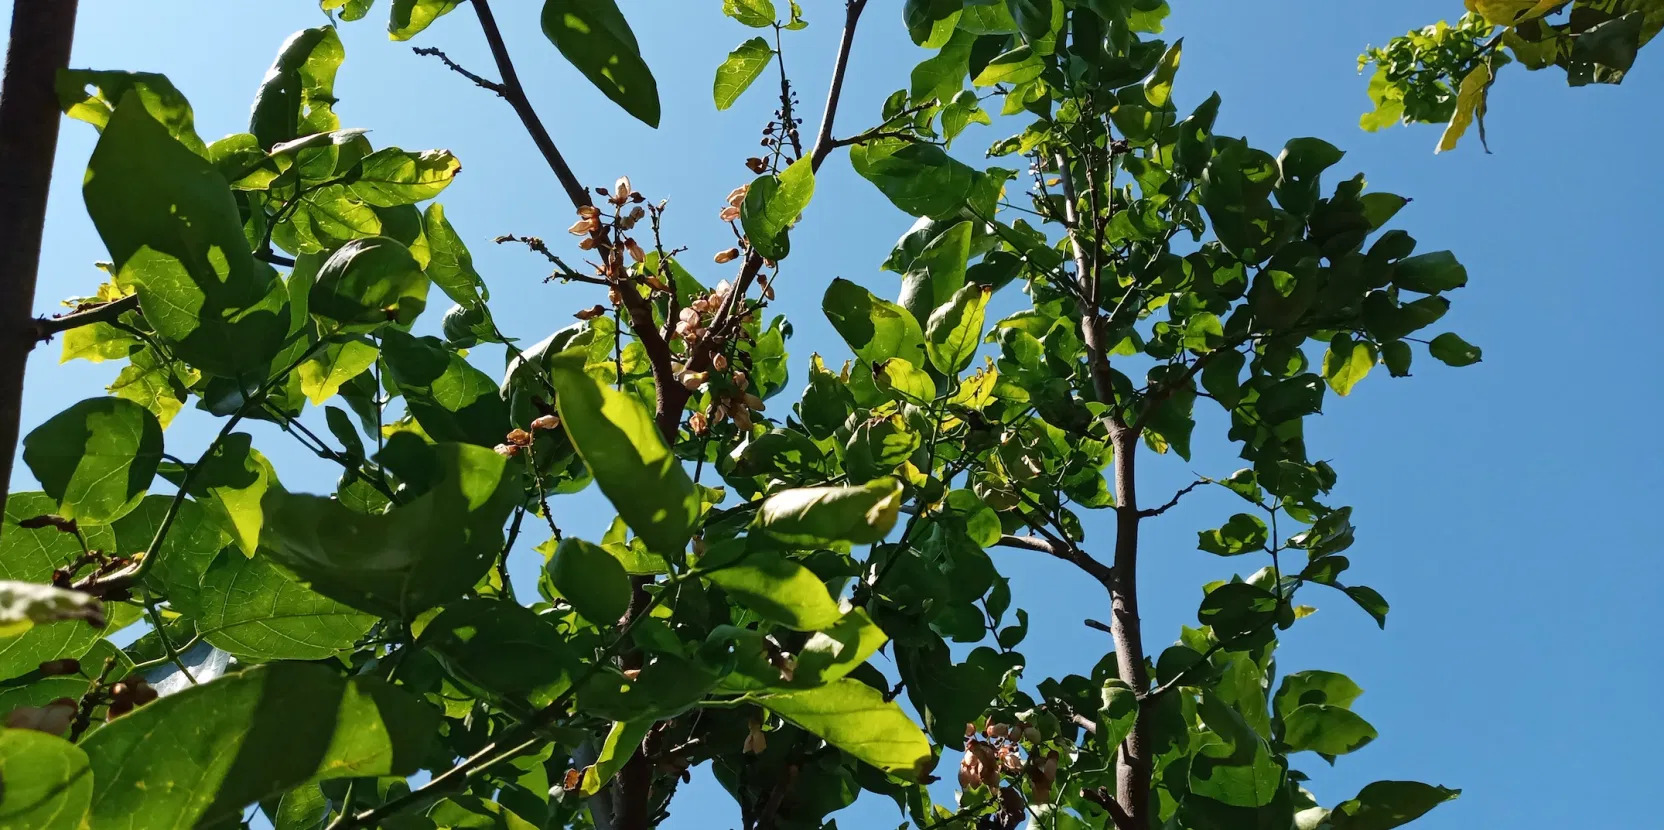 Pongamia is shown growing in an area of marginal lands planted using an agroforestry system mixed with Alpinia galanga and honey bee husbandry in the FORDIA Research Forest in Parungpanjang, Bogor Regency, Indonesia.